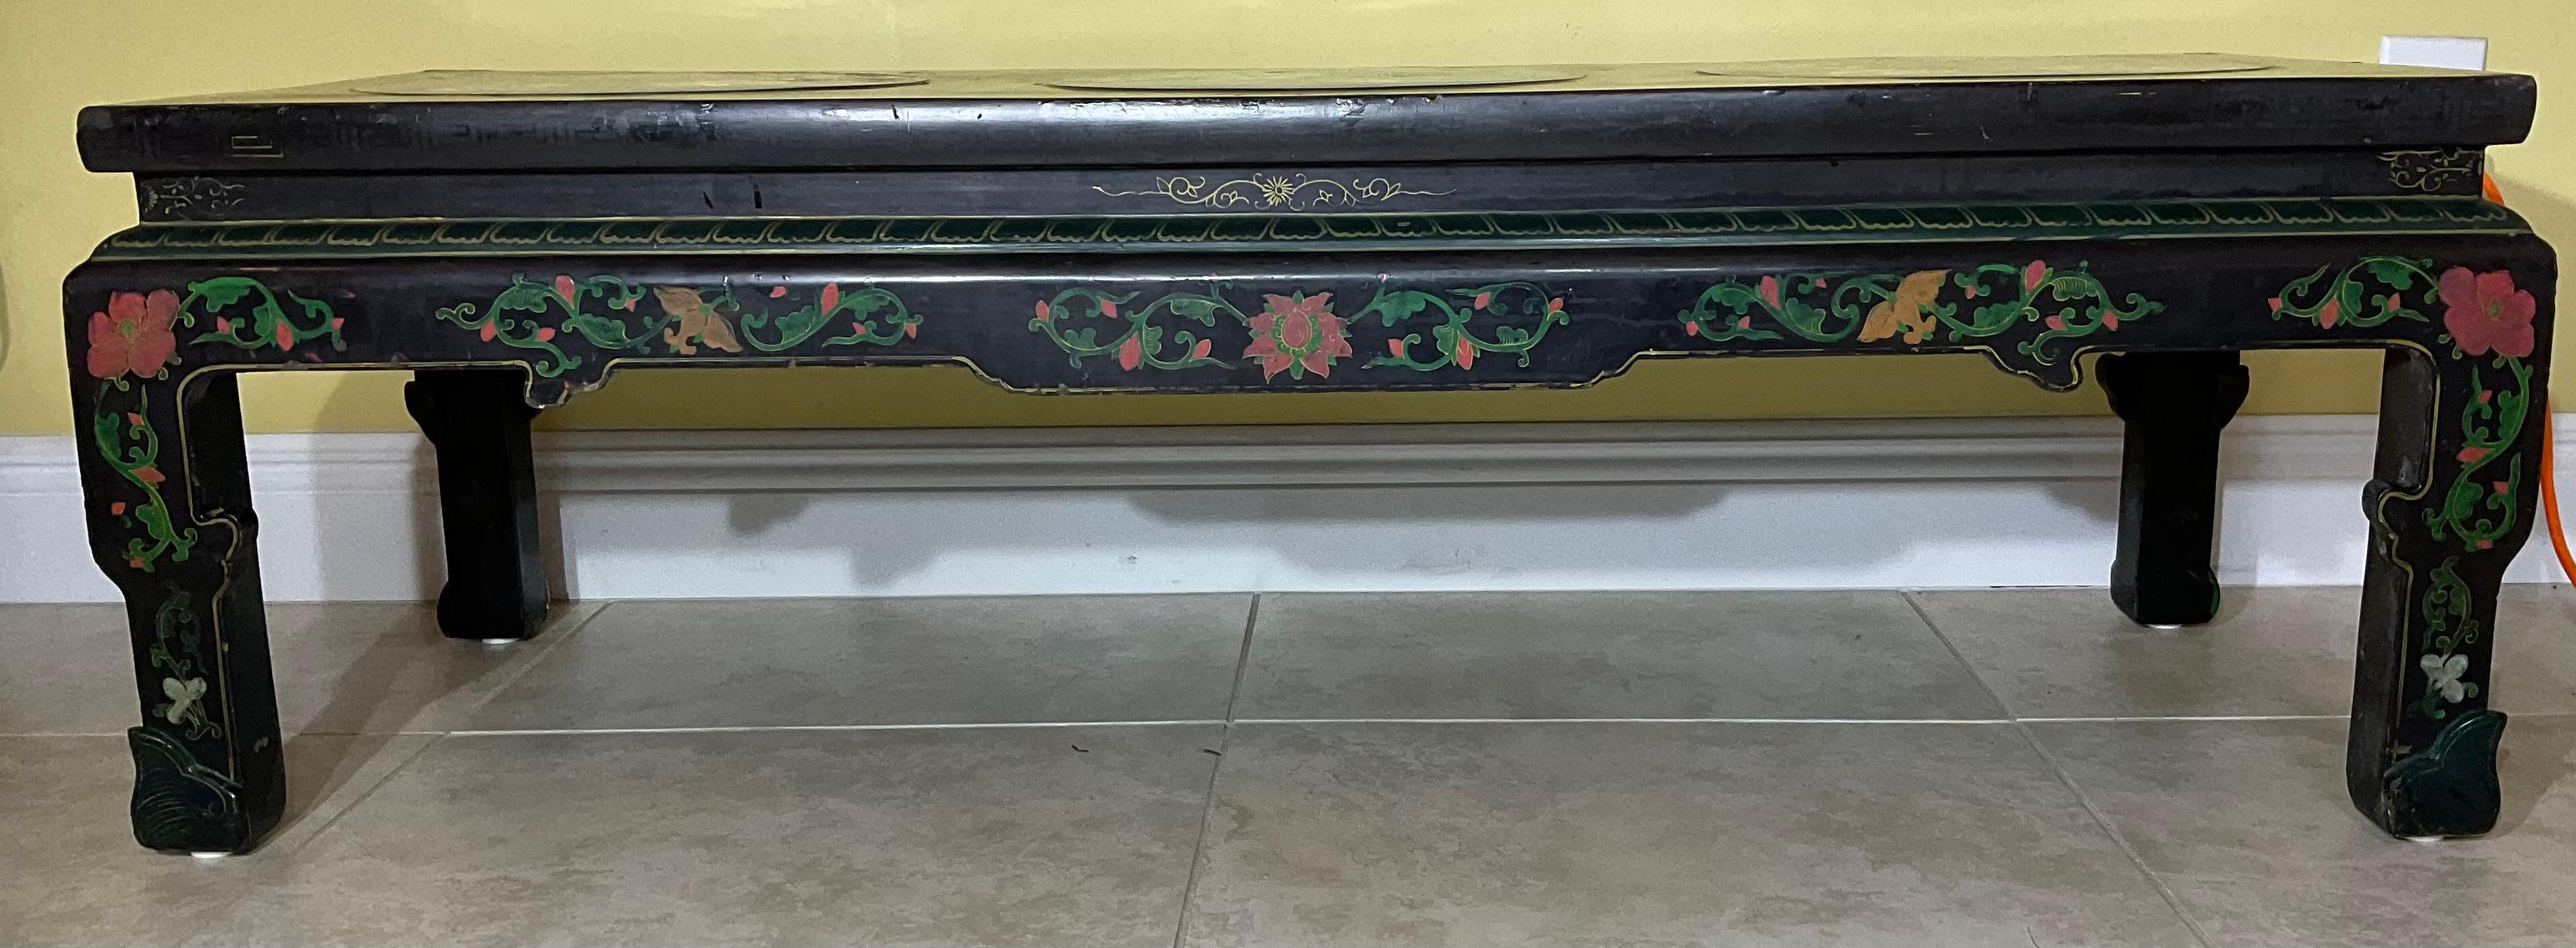 Antique lacquer Chinese Coffee Table With Three Colorful Cloisonné Medallion For Sale 6